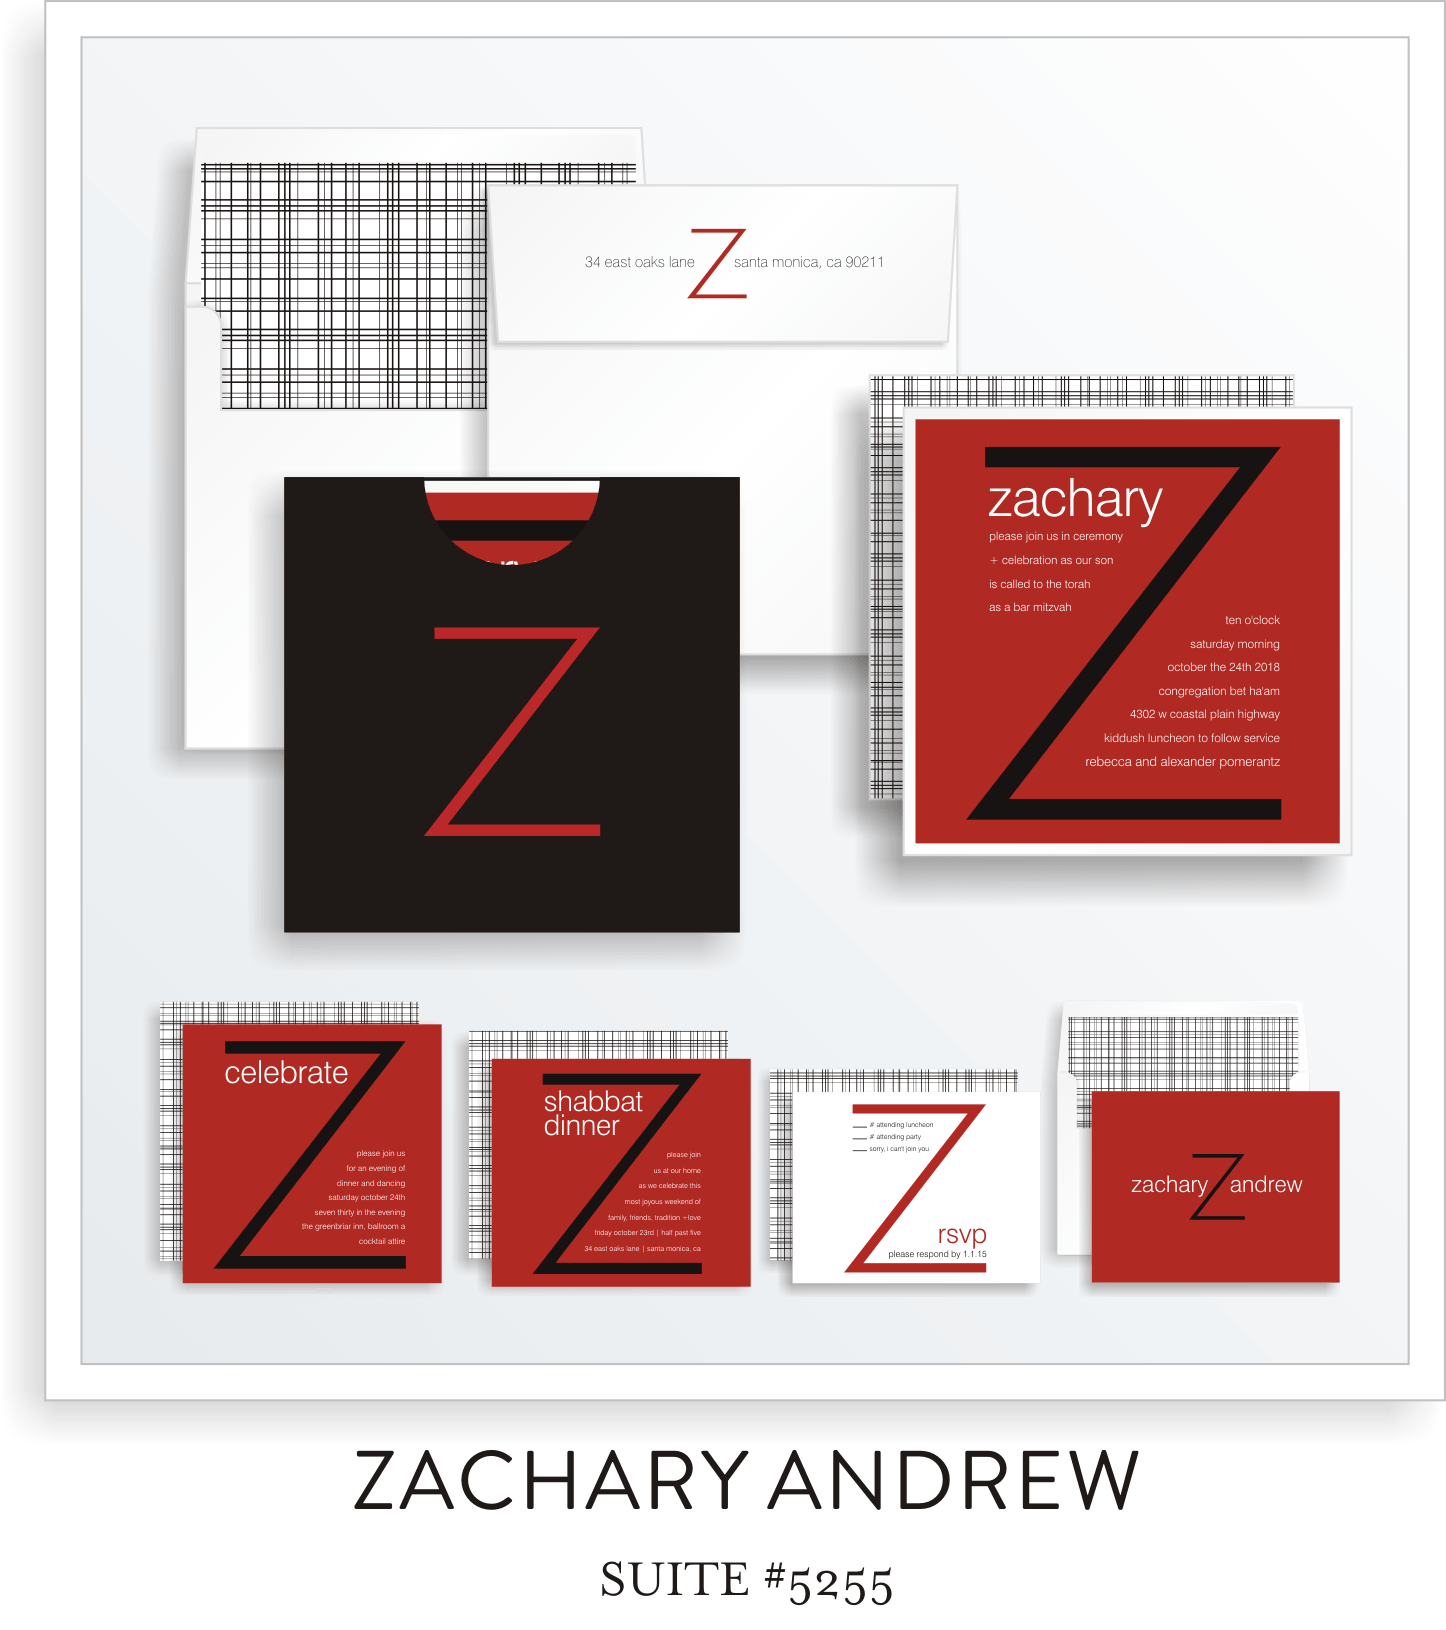 Copy of Copy of Bar Mitzvah Invitation Suite 5255 - Zachary Andrew